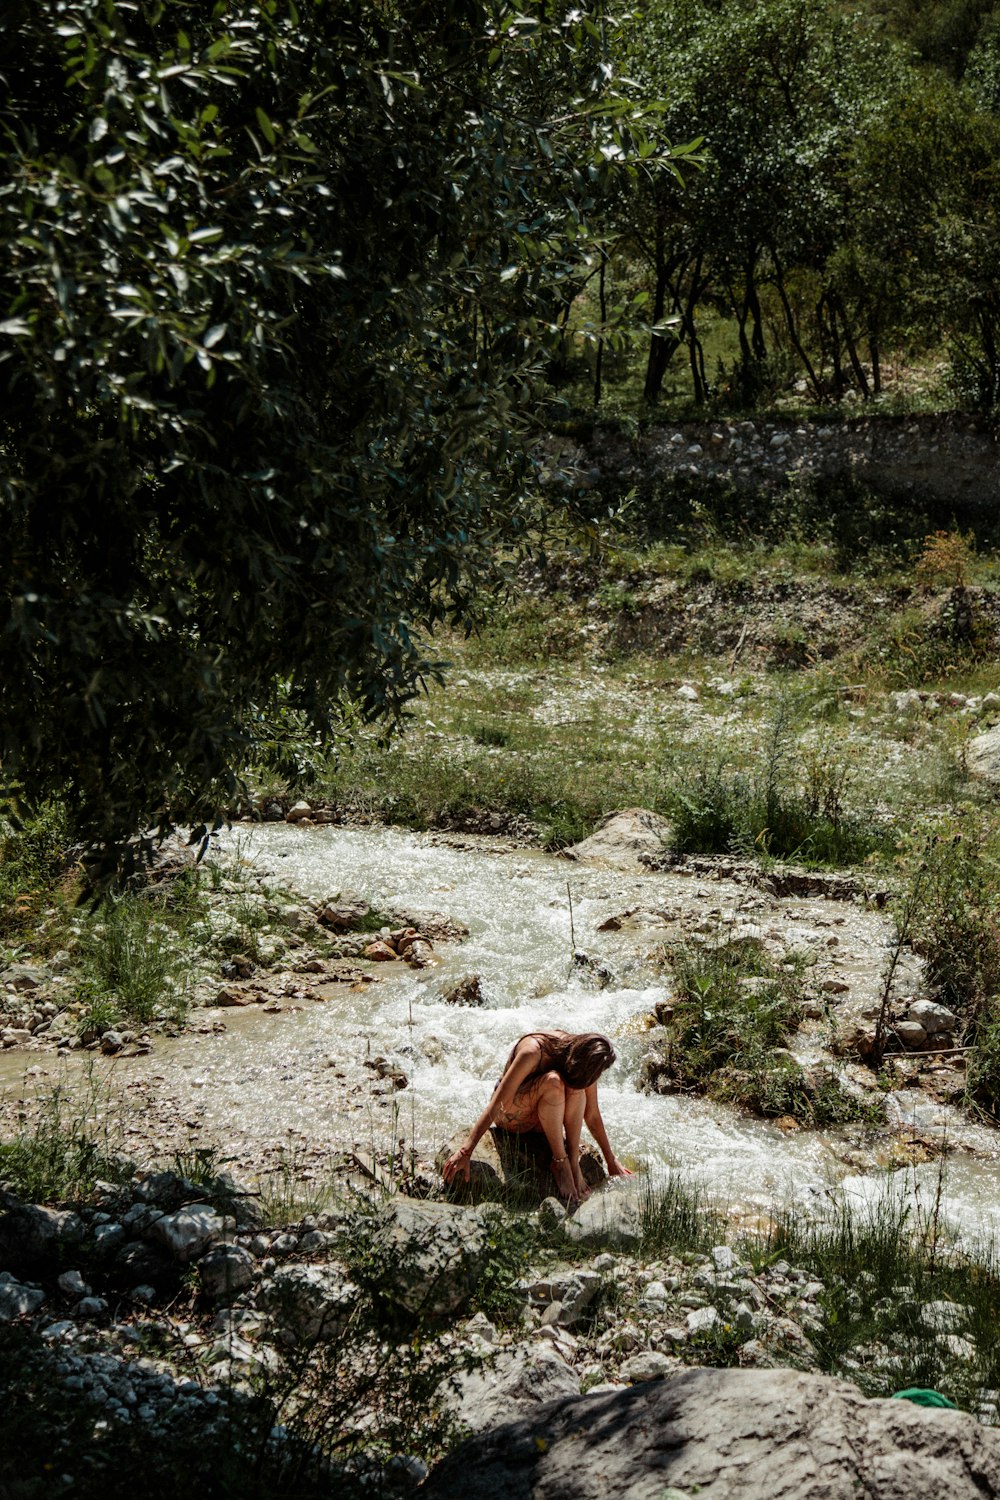 a woman sitting on the ground next to a river